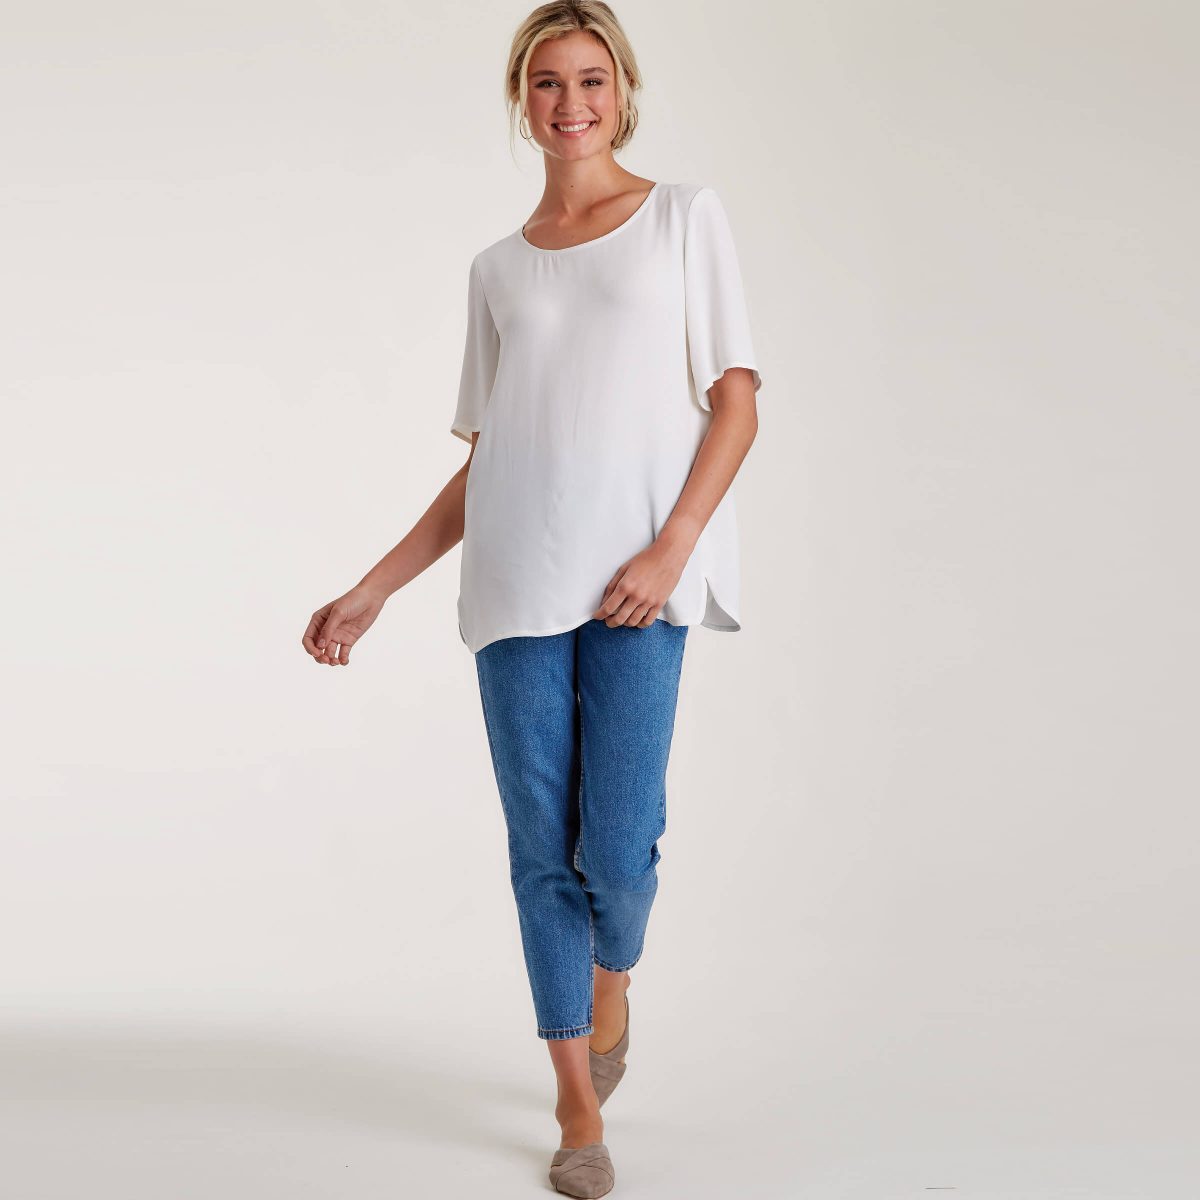 Simplicity Sewing Pattern S9107 Misses' Tops